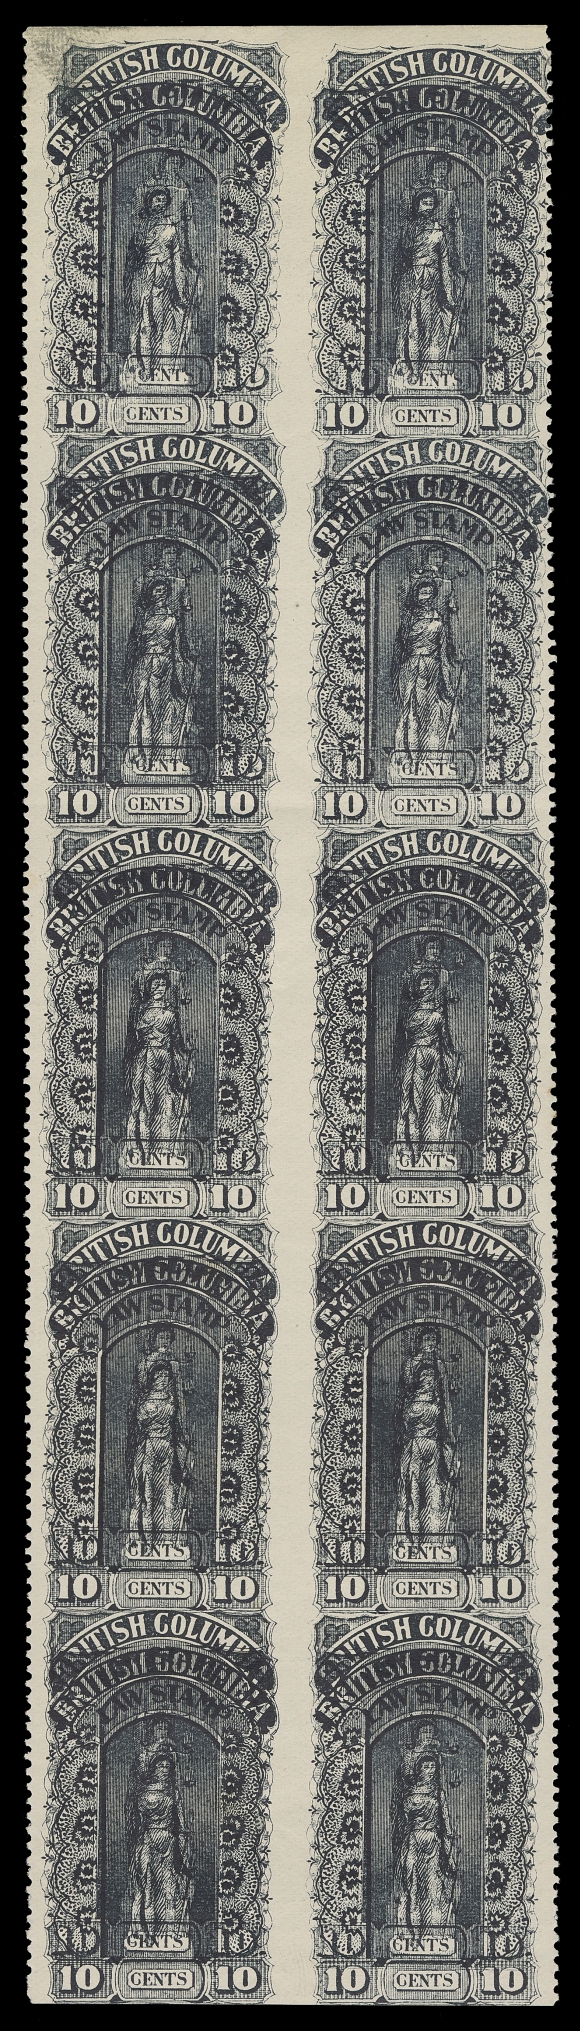 CANADA REVENUES (PROVINCIAL)  BCL16c, d, variety,An outstanding mint block of ten (2 x 5) IMPERFORATE VERTICALLY between, also IMPERFORATE HORIZONTALLY (unlisted) as well as displaying a striking DOUBLE PRINT error with two distinctive impressions, horizontal crease along bottom frameline of second row, a few gum wrinkles, couple tone spots, top pair LH, otherwise NEVER HINGED. Certainly among the most dramatic items of British Columbia Law Stamps and especially desirable with combination of printing and perforation errors, Fine (Van Dam double print and imperforate vertically both unpriced mint; unlisted with both errors combined)